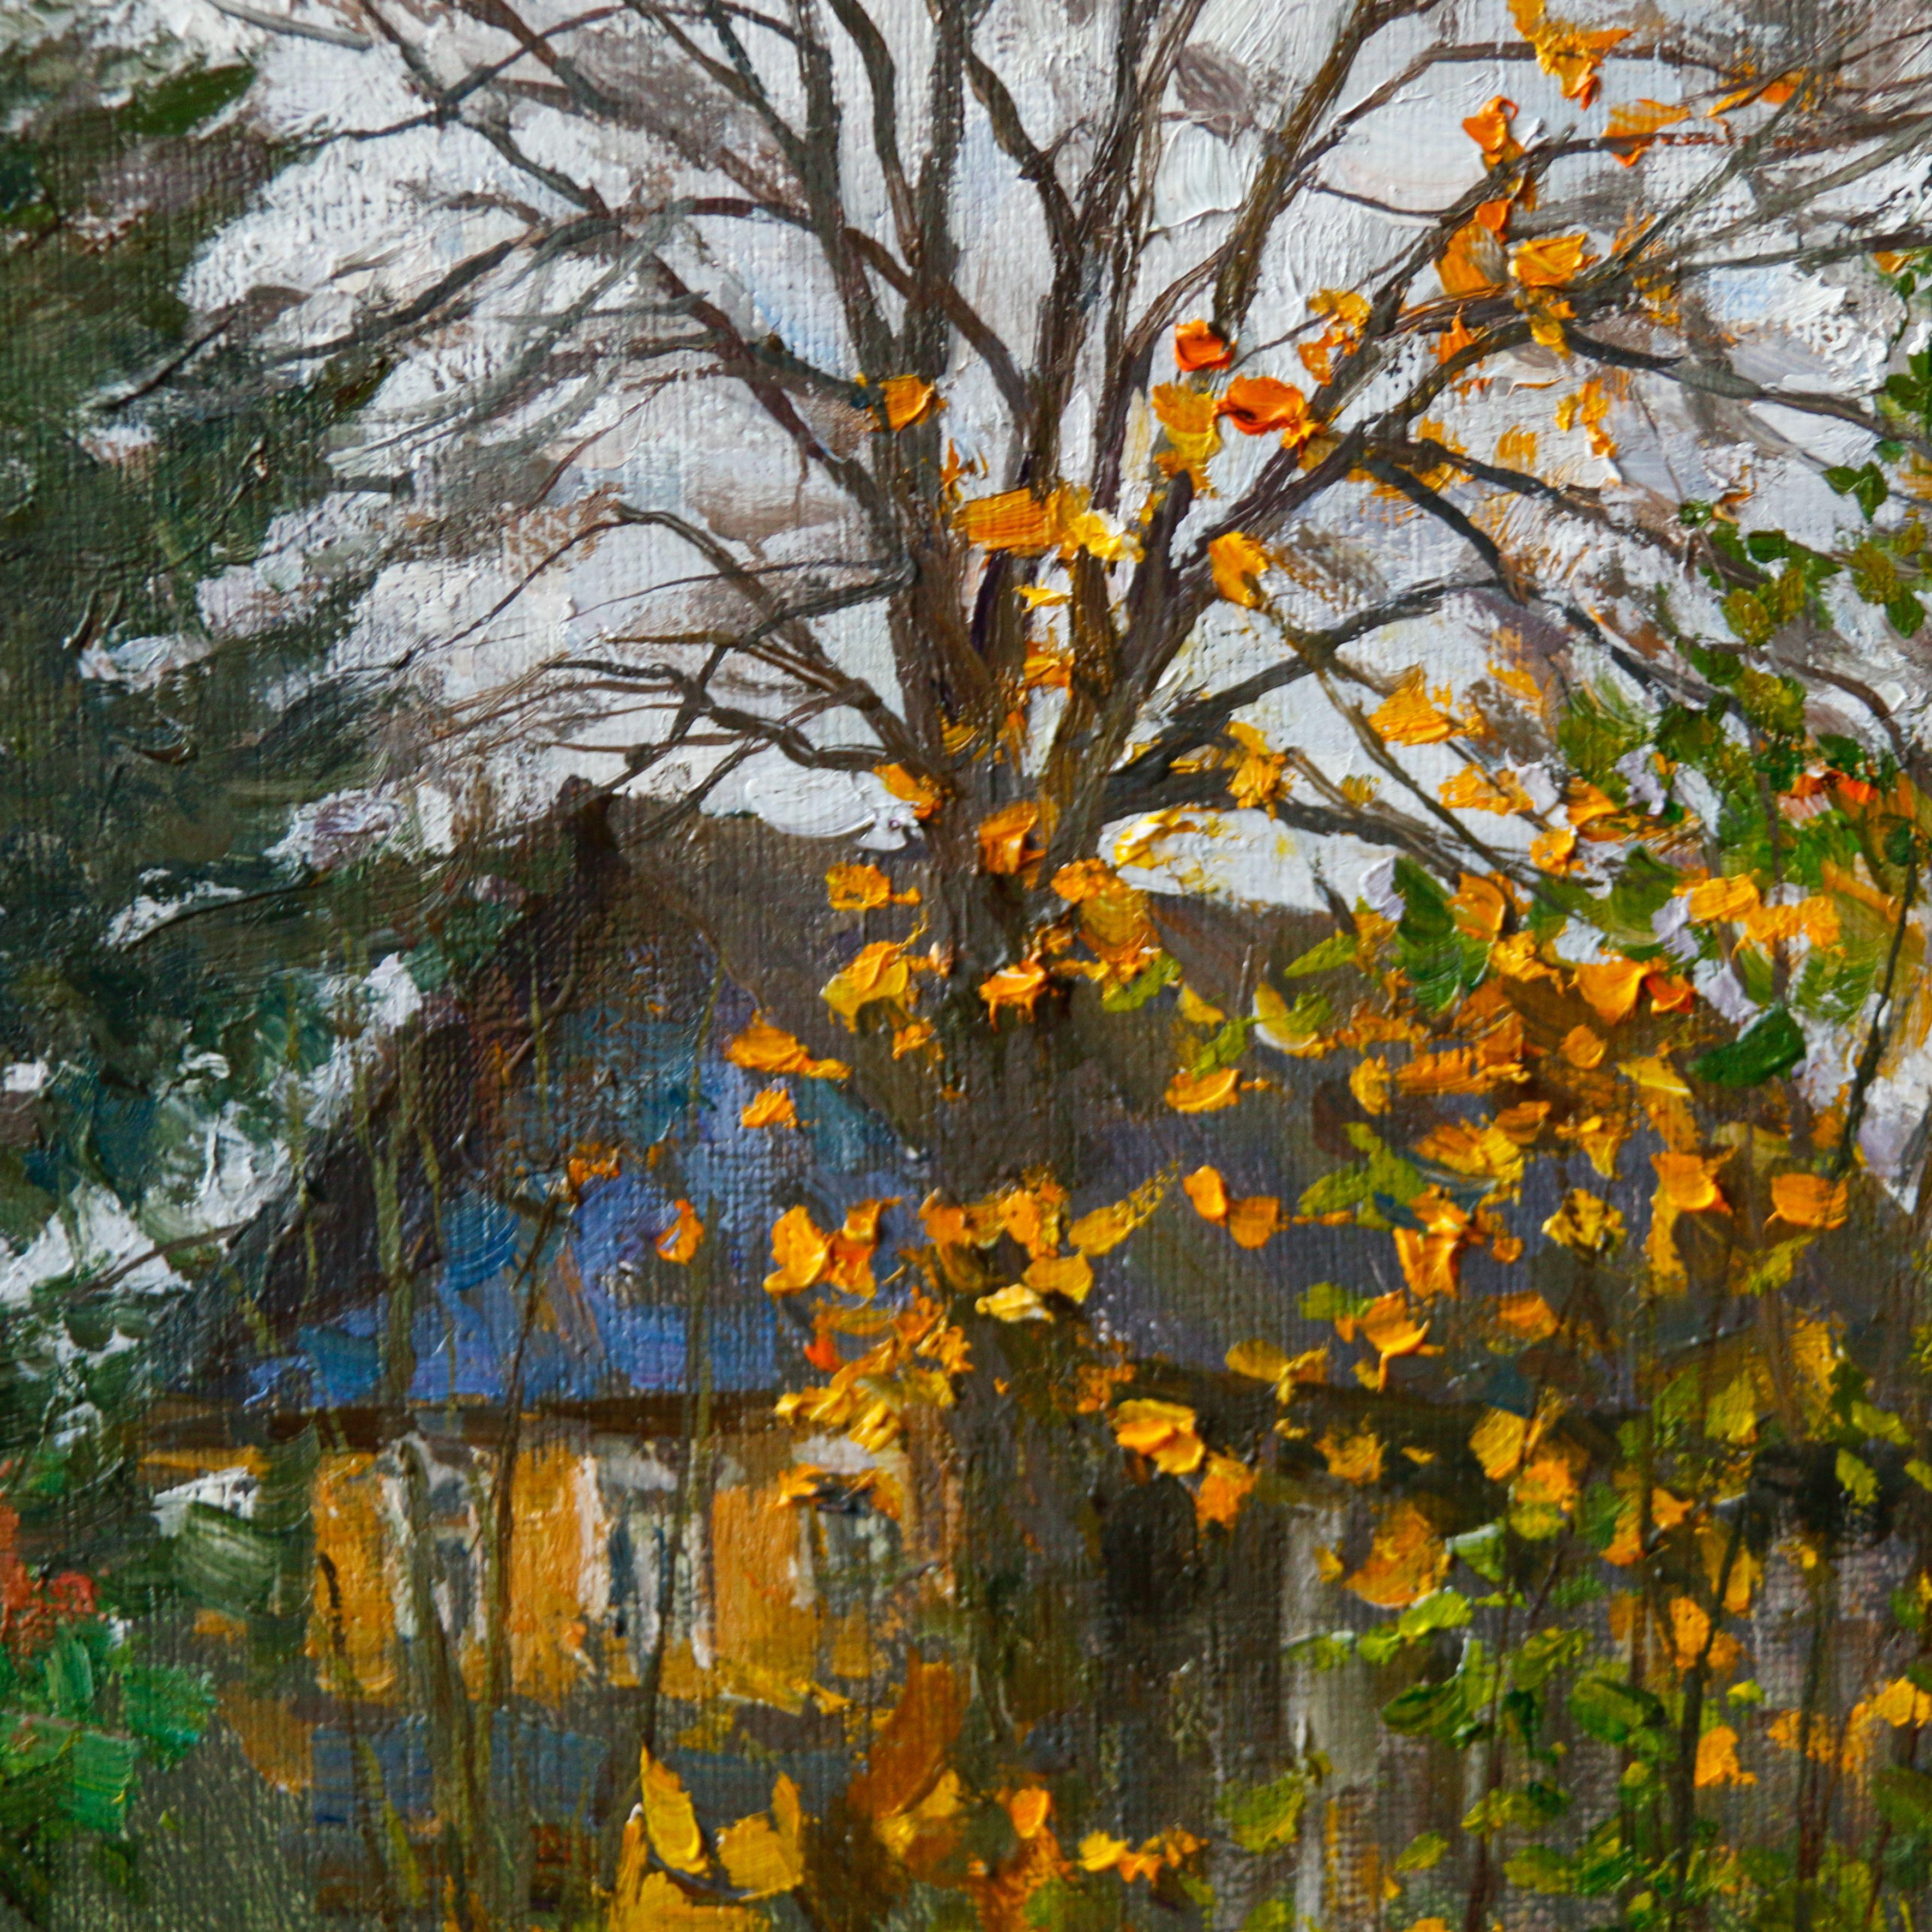 Late Fall, Painting, Oil on Canvas 2